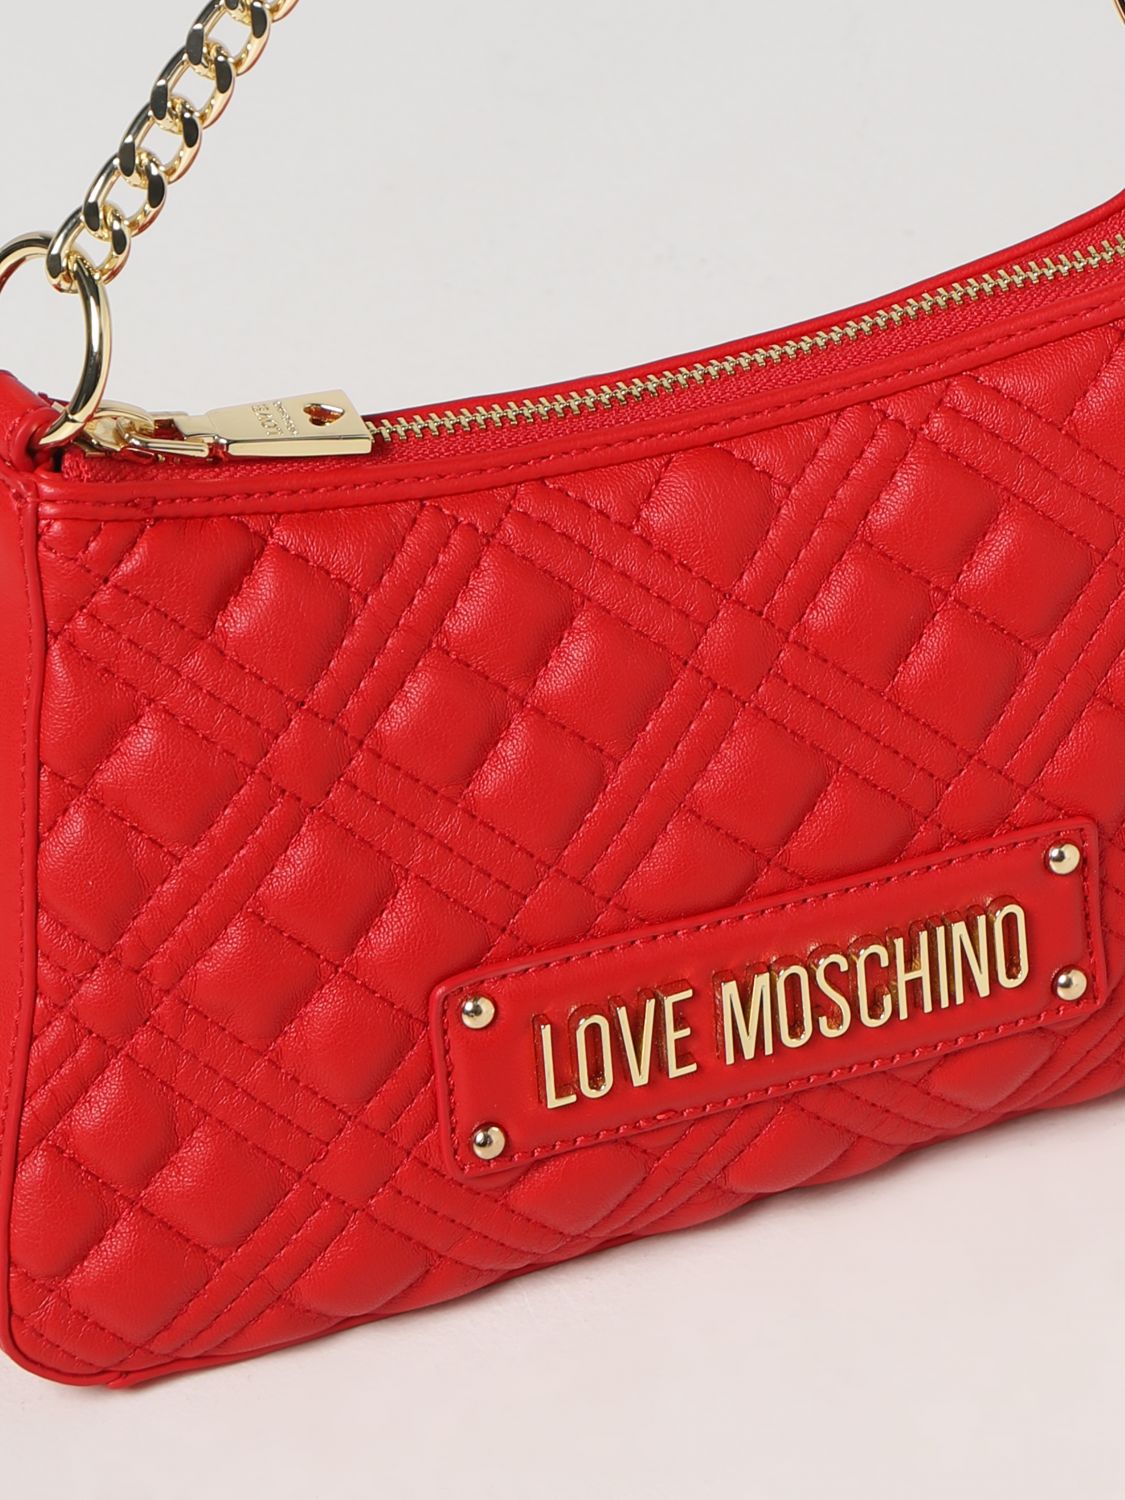 LOVE MOSCHINO: shoulder bag for woman - Red | Love Moschino shoulder ...